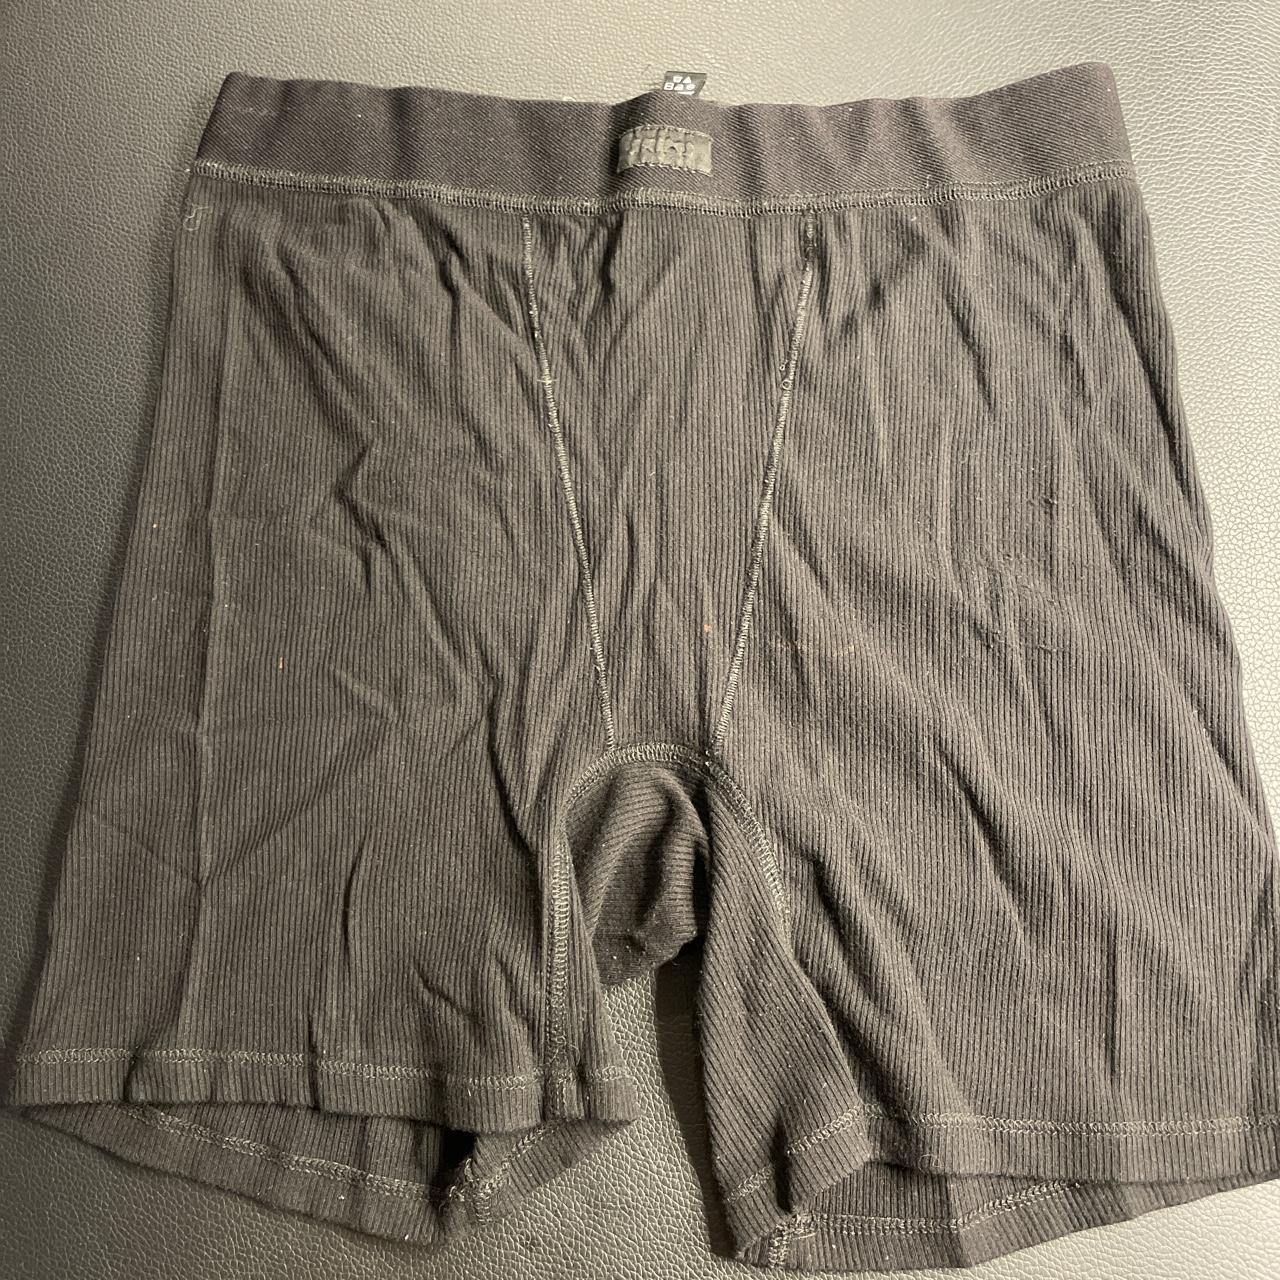 Skims soft lounge boxer Wear and tear noted in pics - Depop